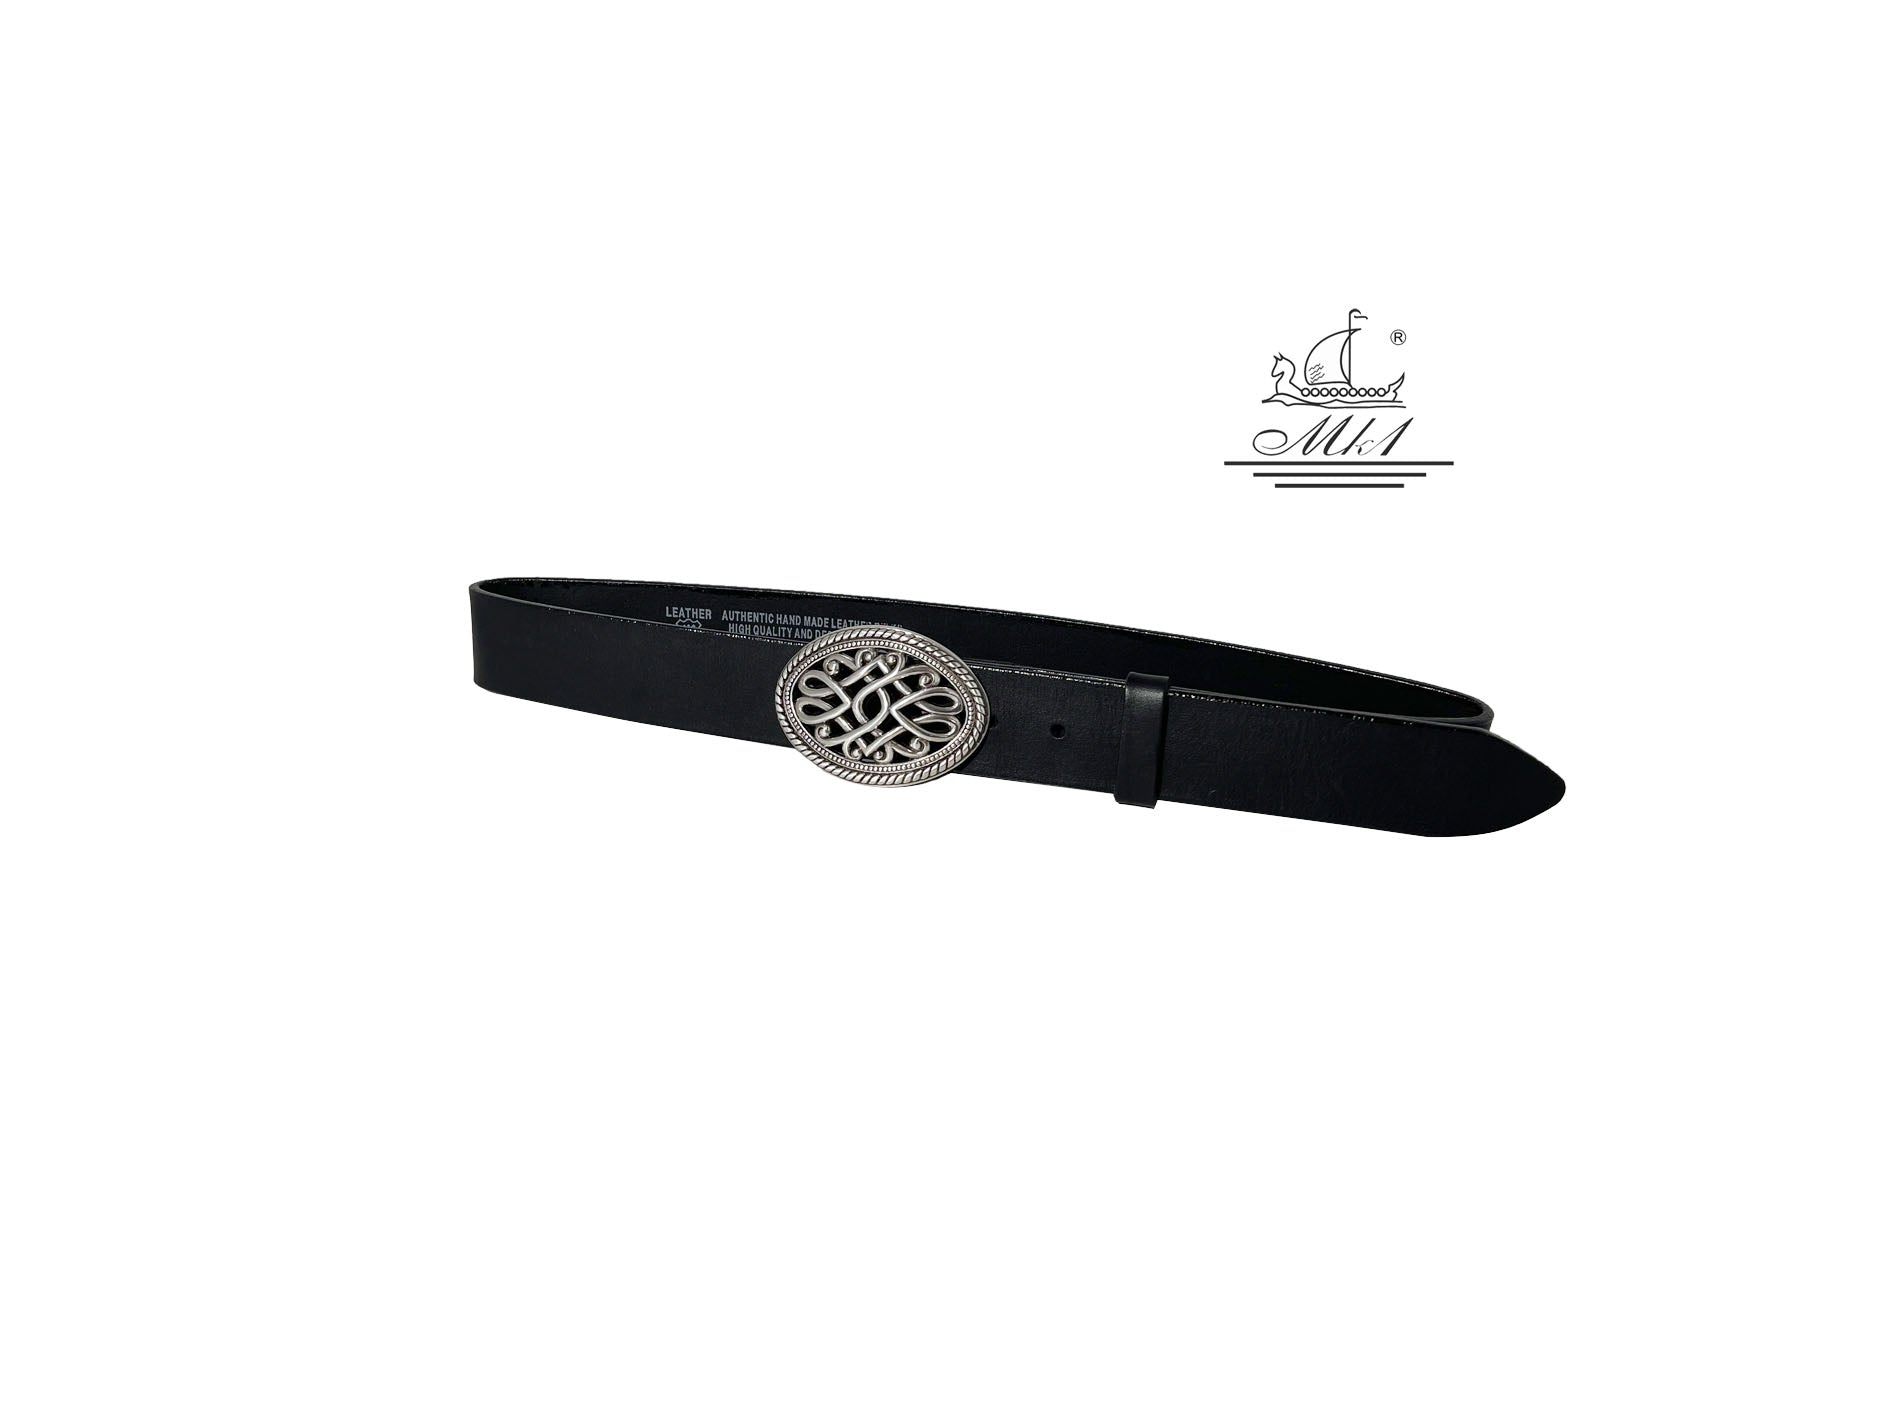 Unisex 4cm wide belt handcrafted from black leather.  101237/40B